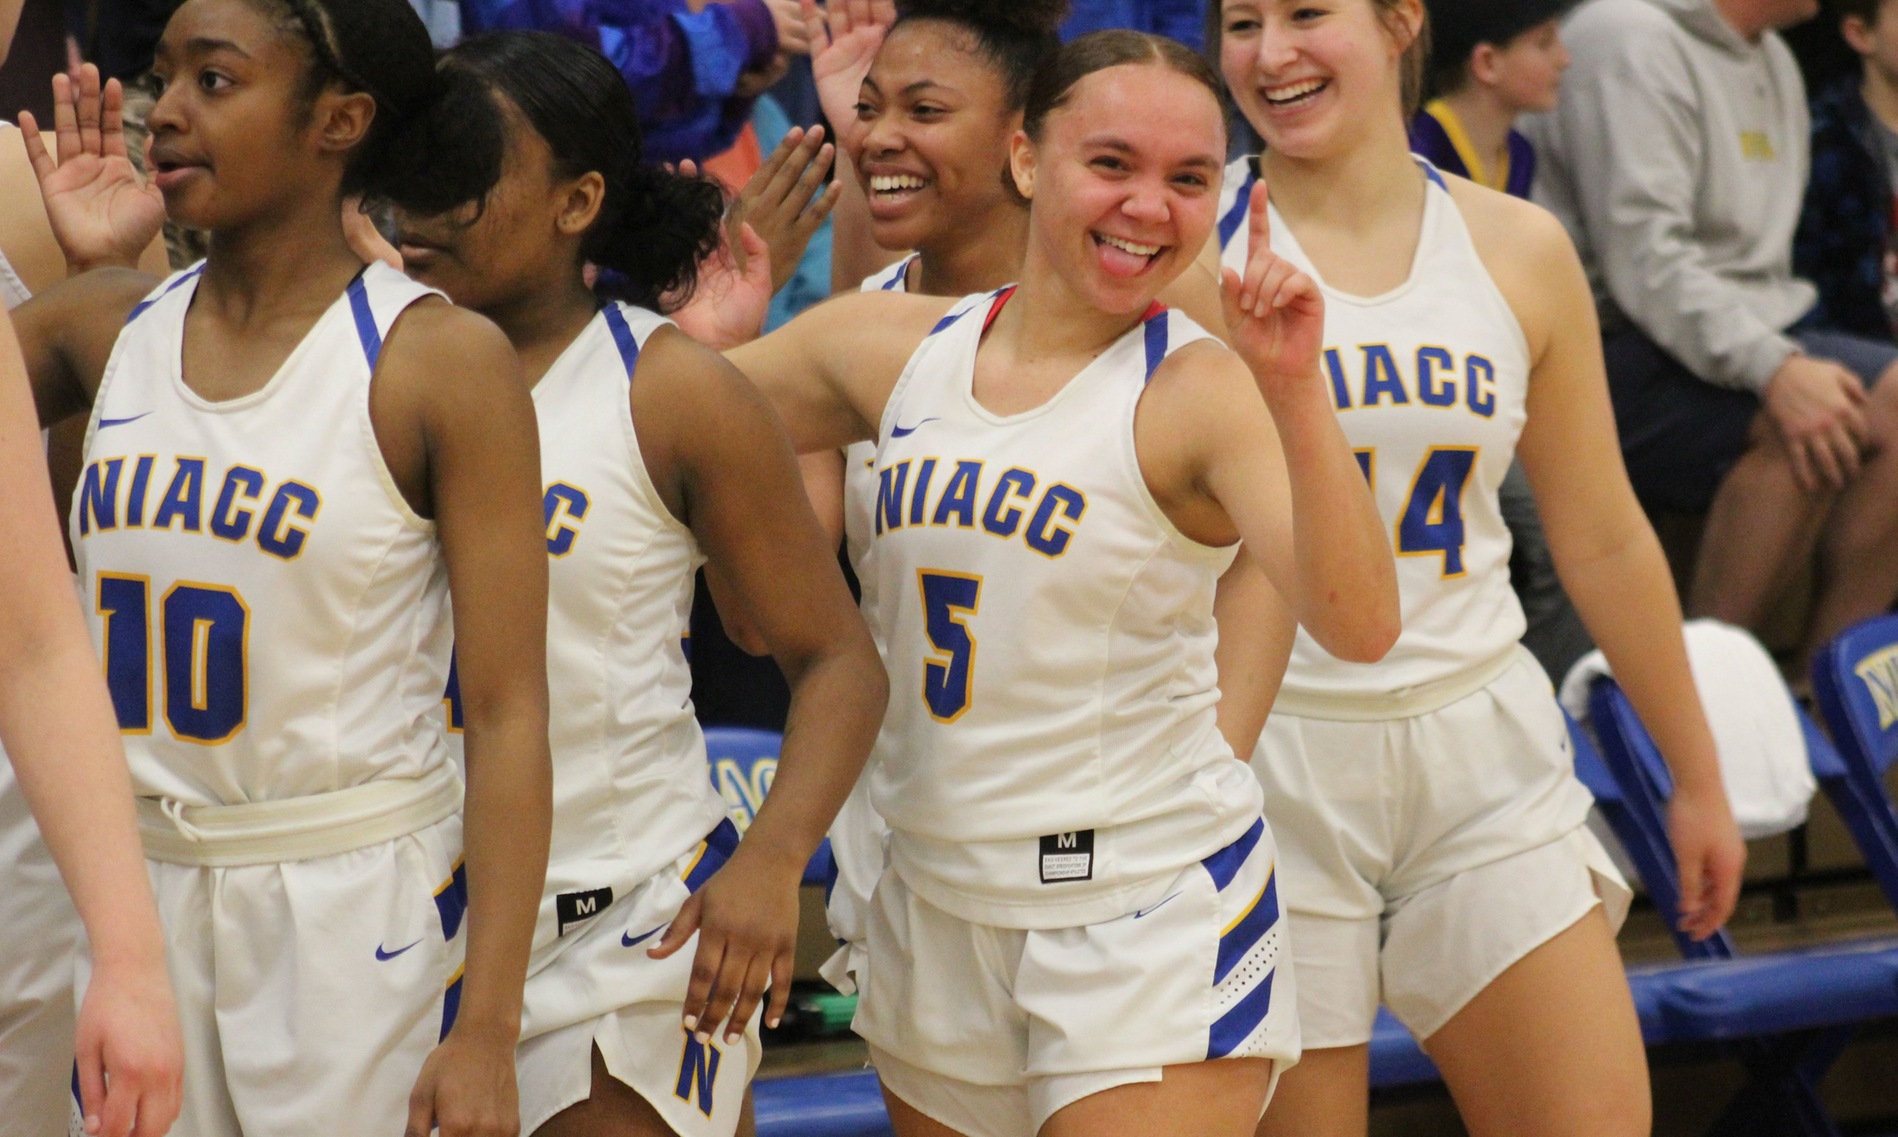 The NIACC women's basketball team was all smiles after Saturday's win over Kirkwood.